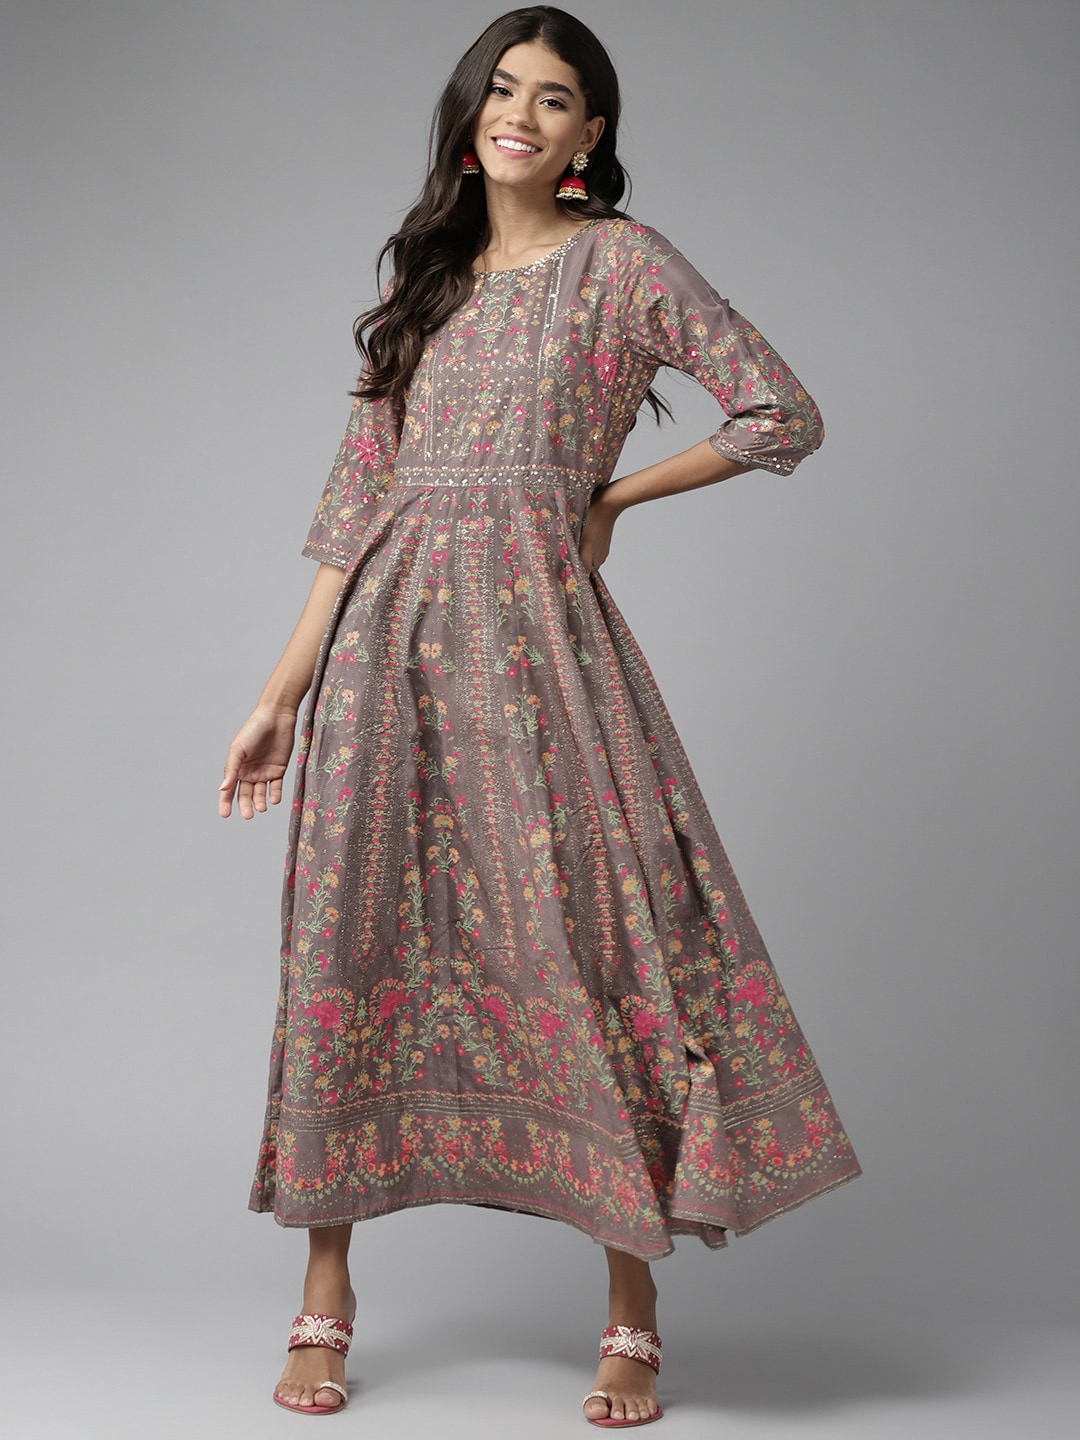 W Women Brown & Pink Ethnic Motifs Printed A-Line Maxi Dress Price in India